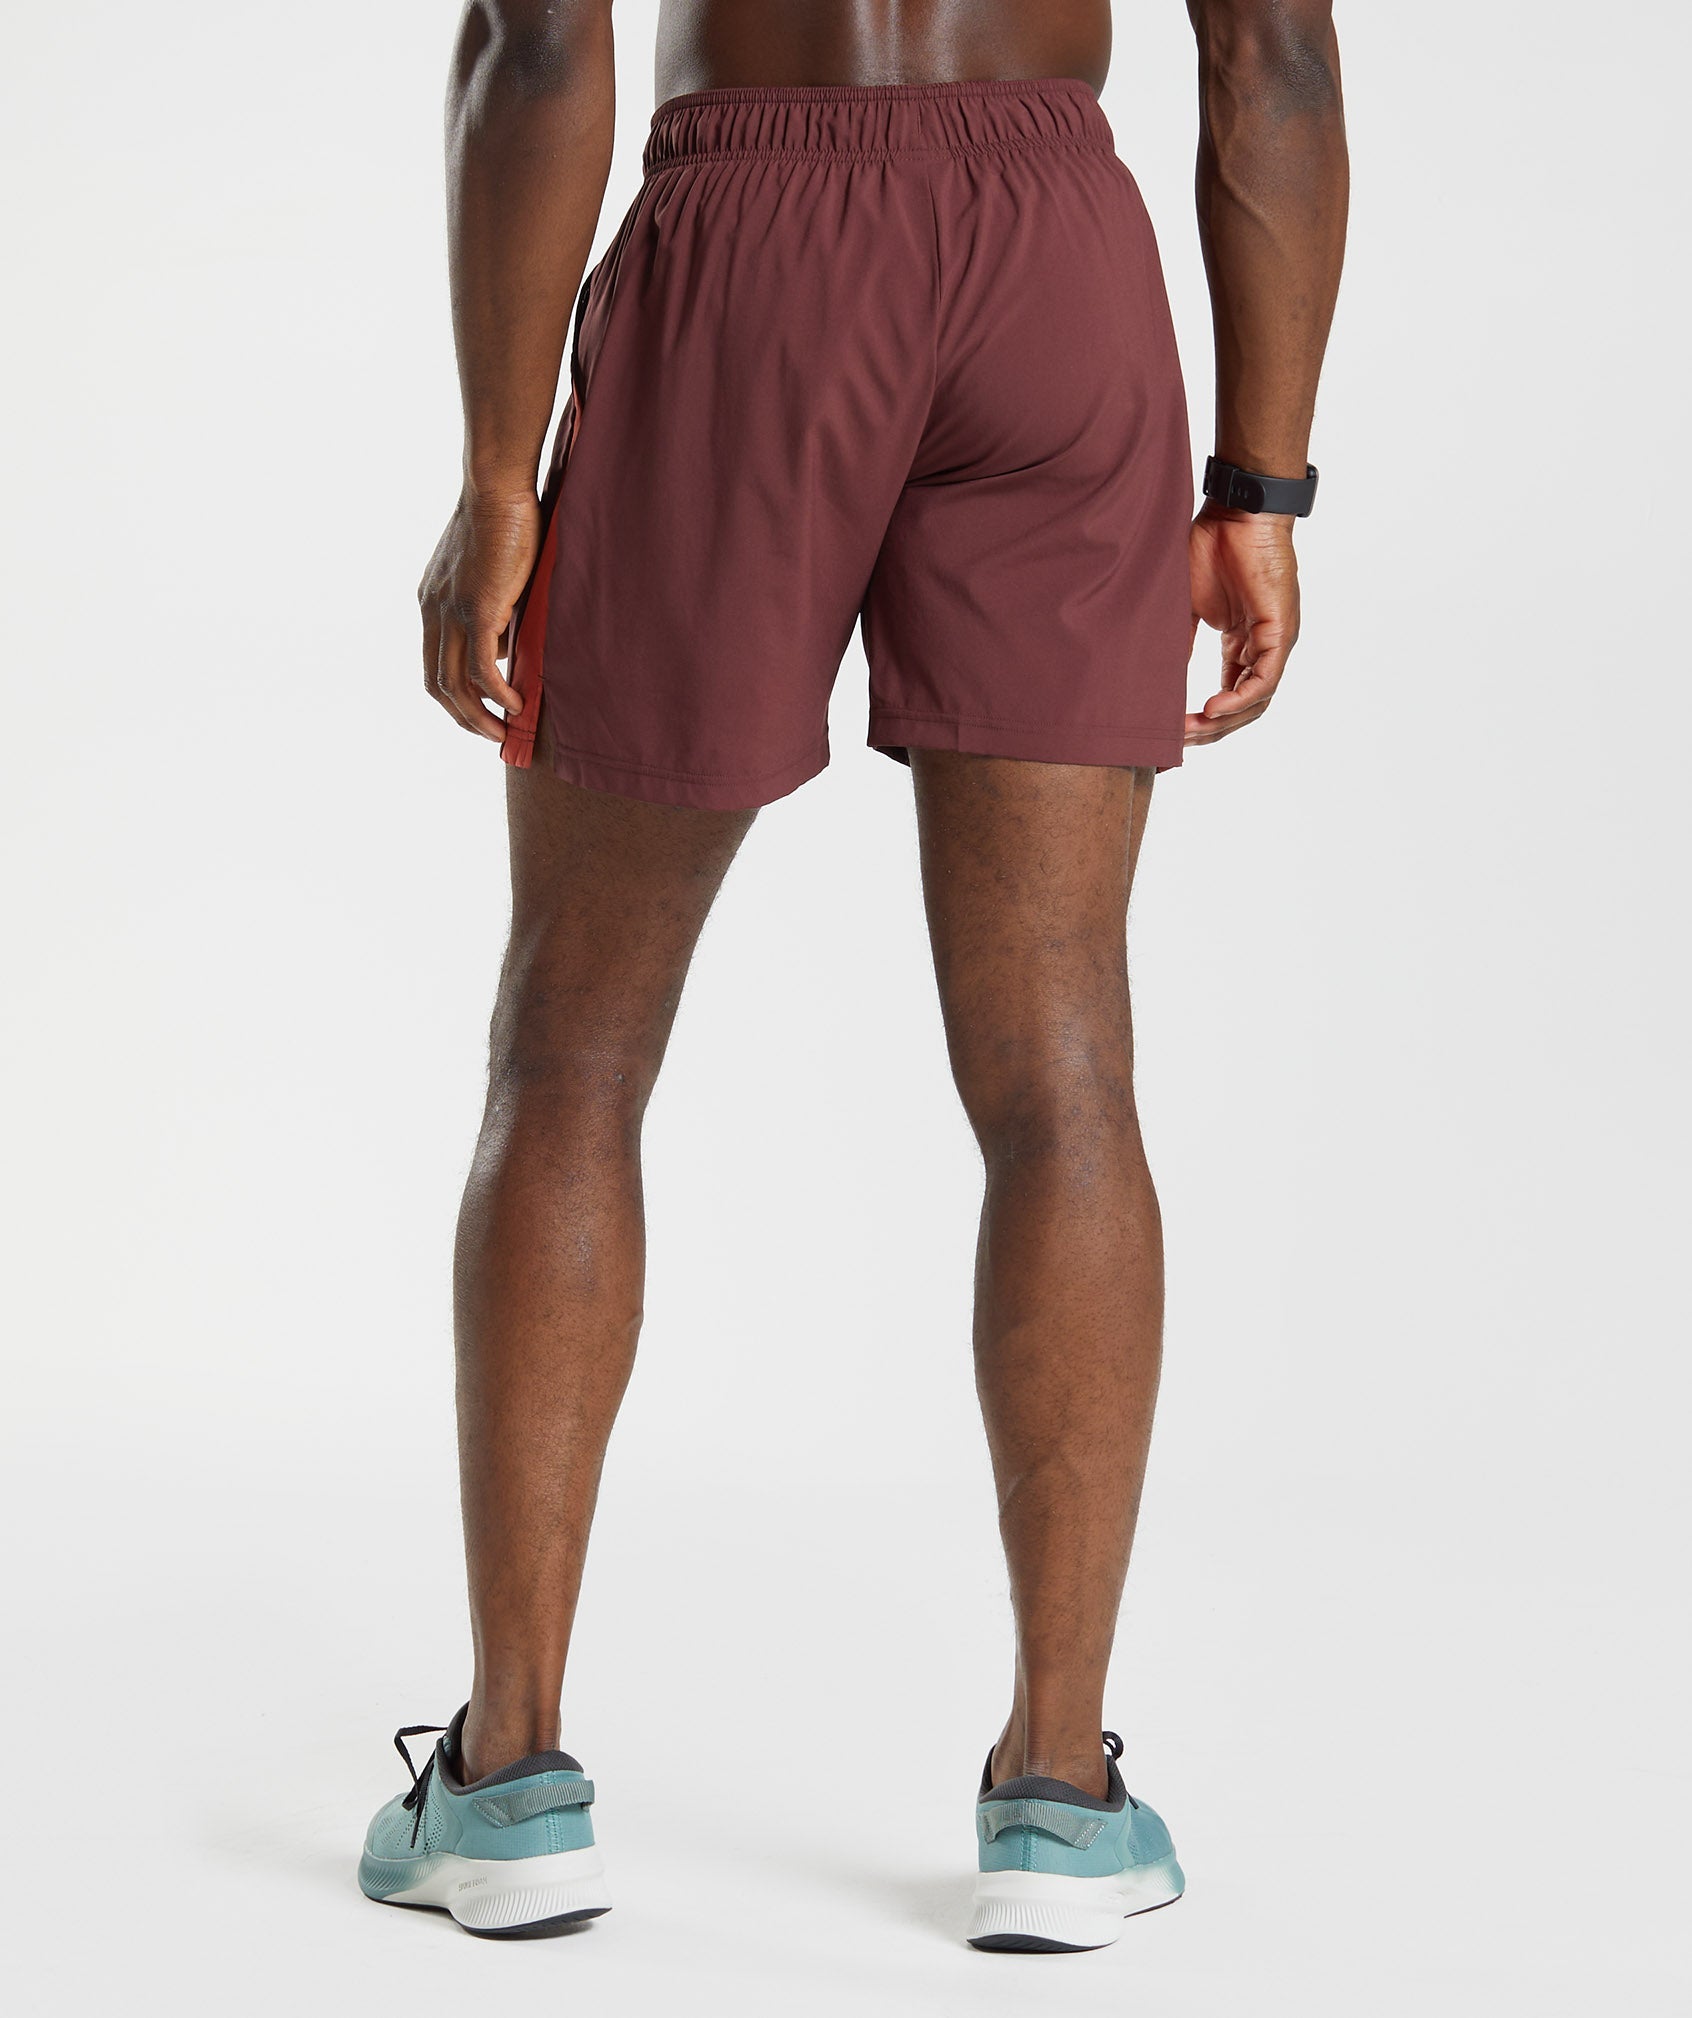 Homme 315 Seamless 1/2 Shorts - Cherry Brown/Athletic Maroon